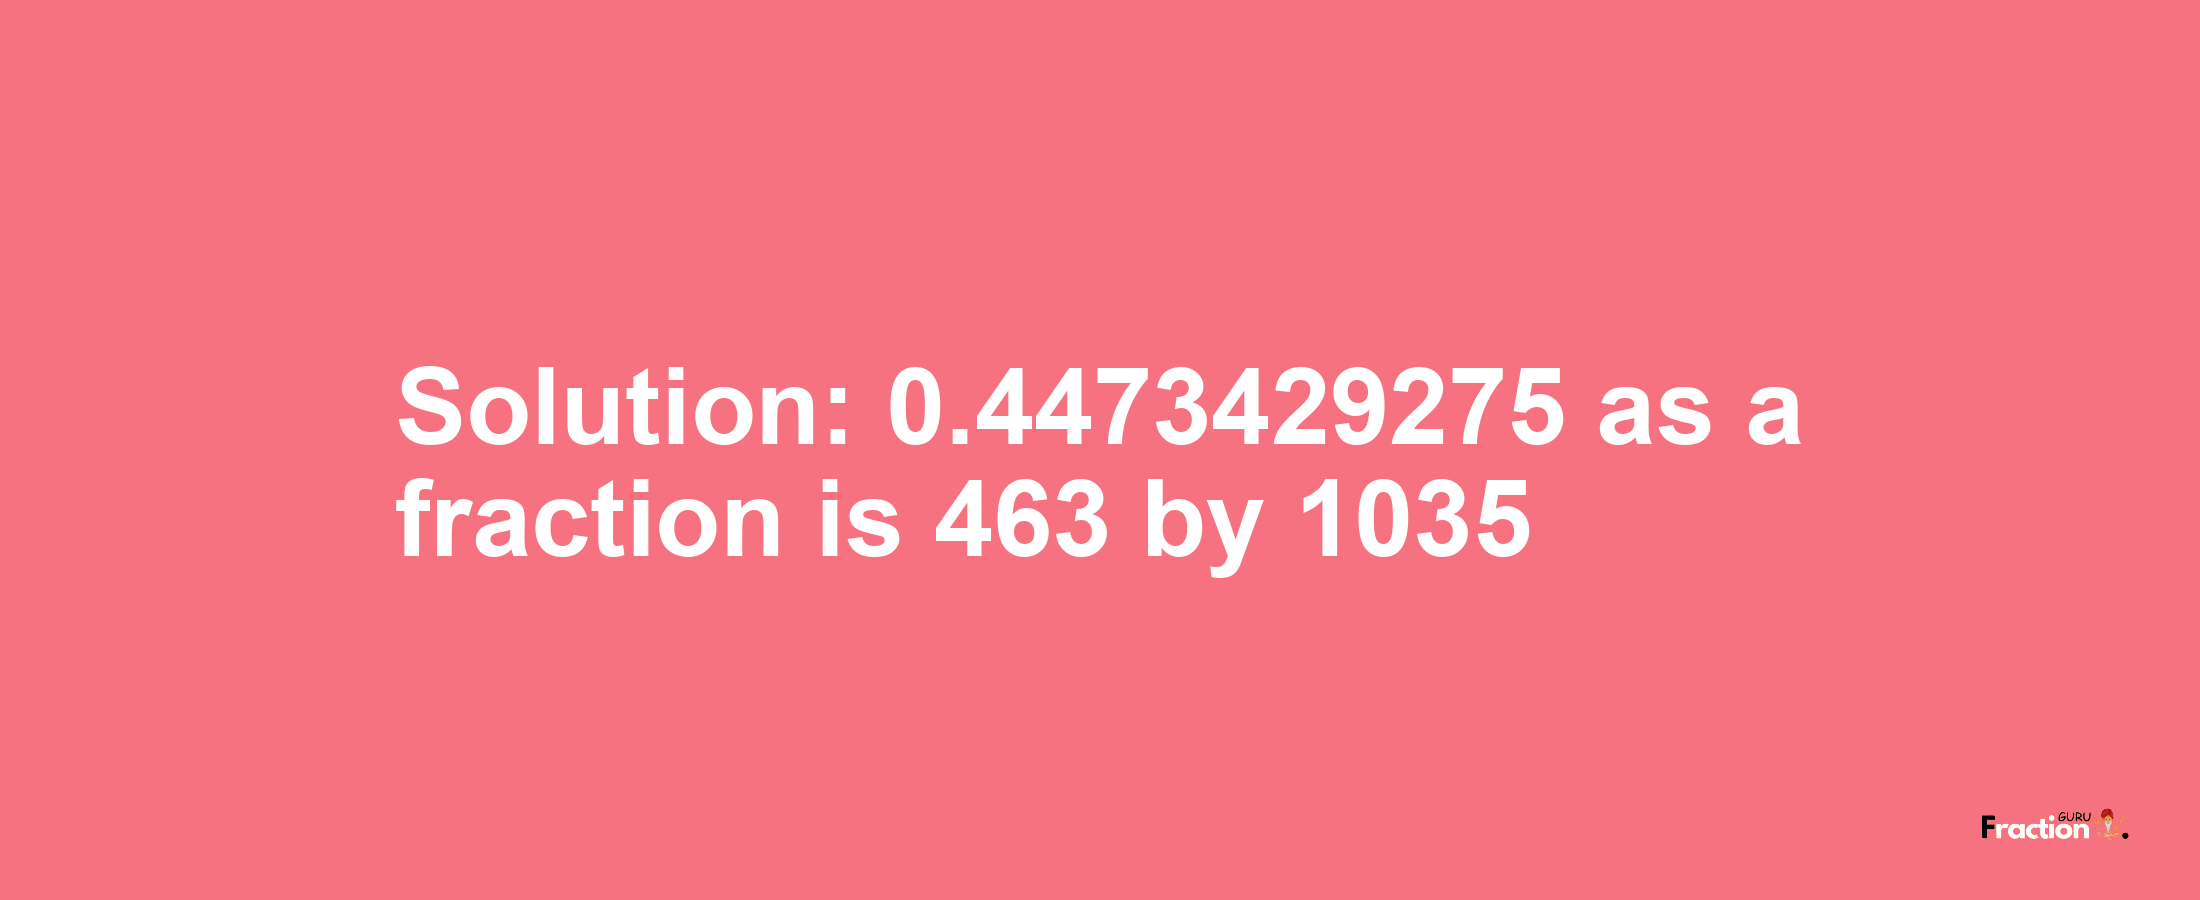 Solution:0.4473429275 as a fraction is 463/1035